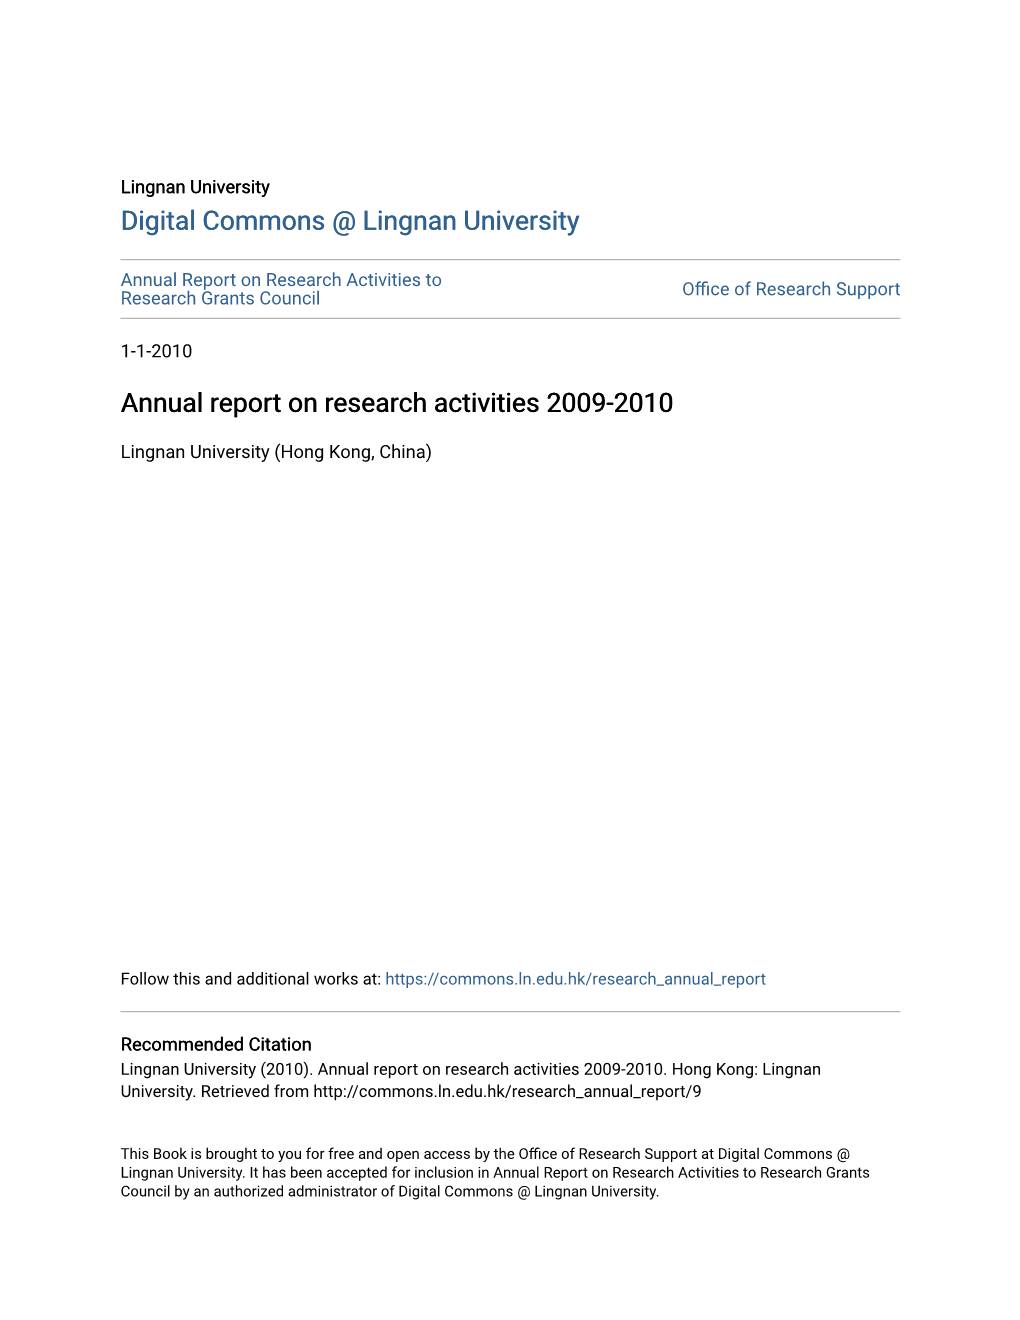 Annual Report on Research Activities 2009-2010